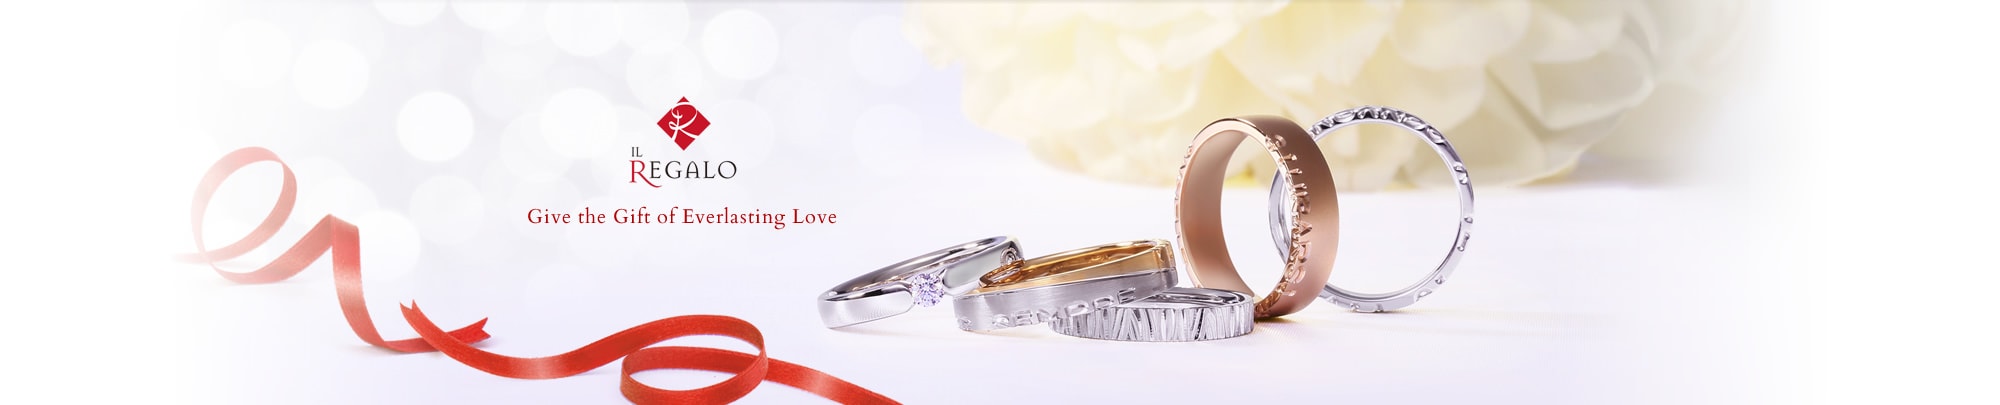 Give the Gift of Everlasting Love Regalo